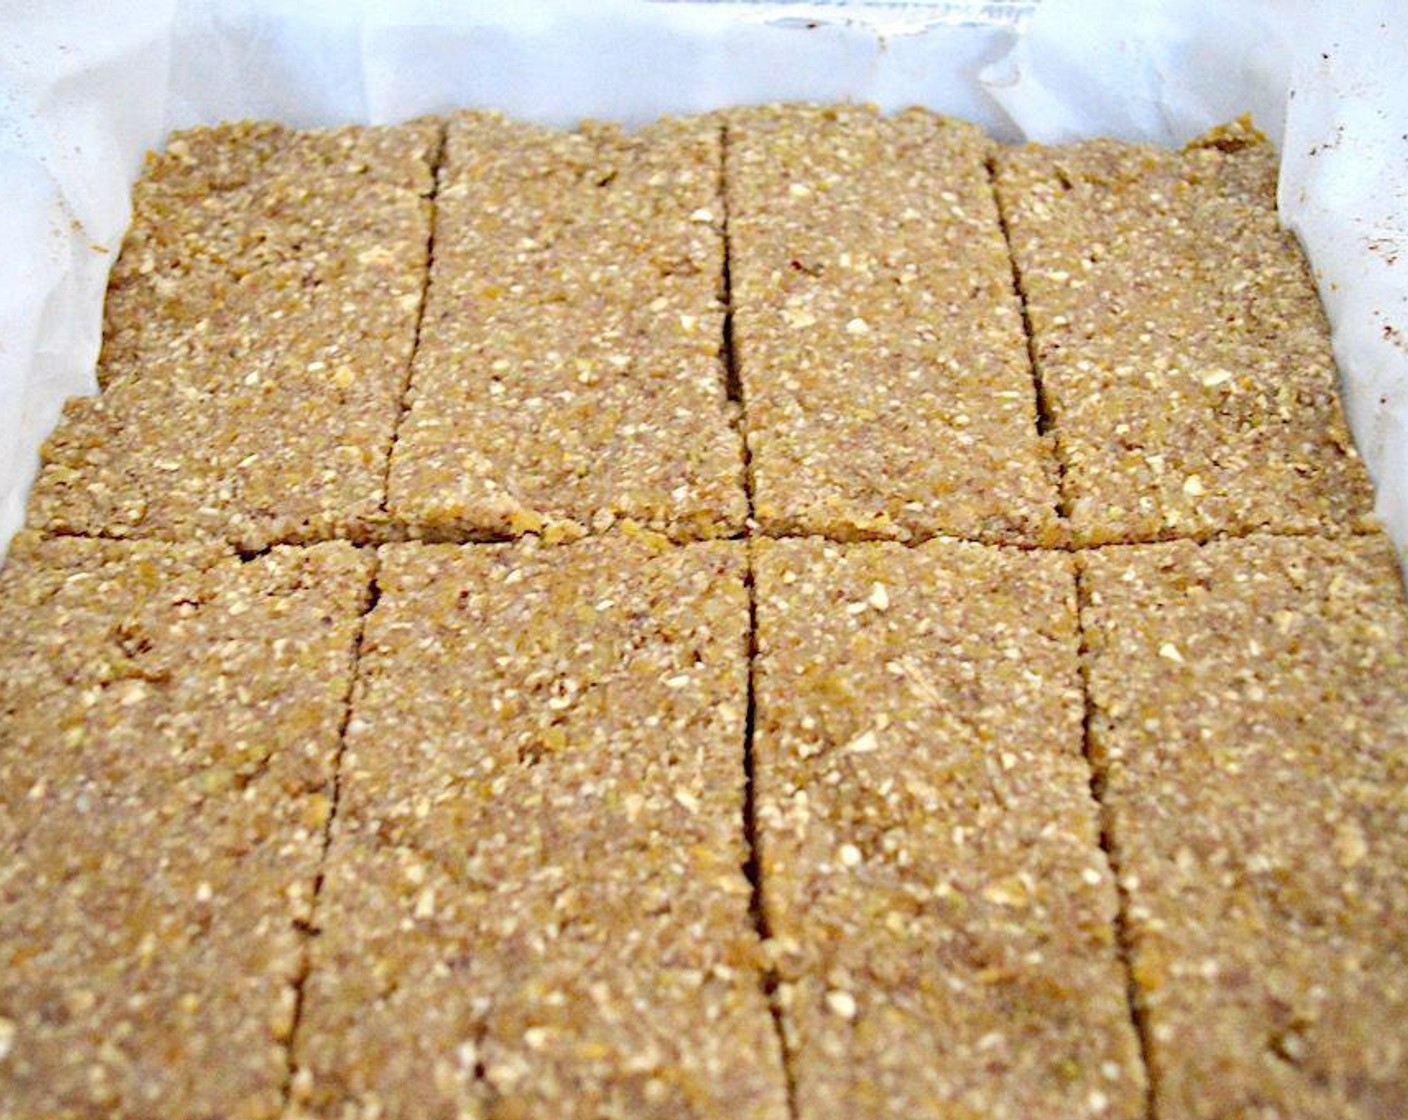 step 5 Bake the mixture for 20 minutes, then take it out and let it cool for 10-15 minutes. Slice the mixture into bars by making 3 equal vertical slices, then making a horizontal cut halfway down.